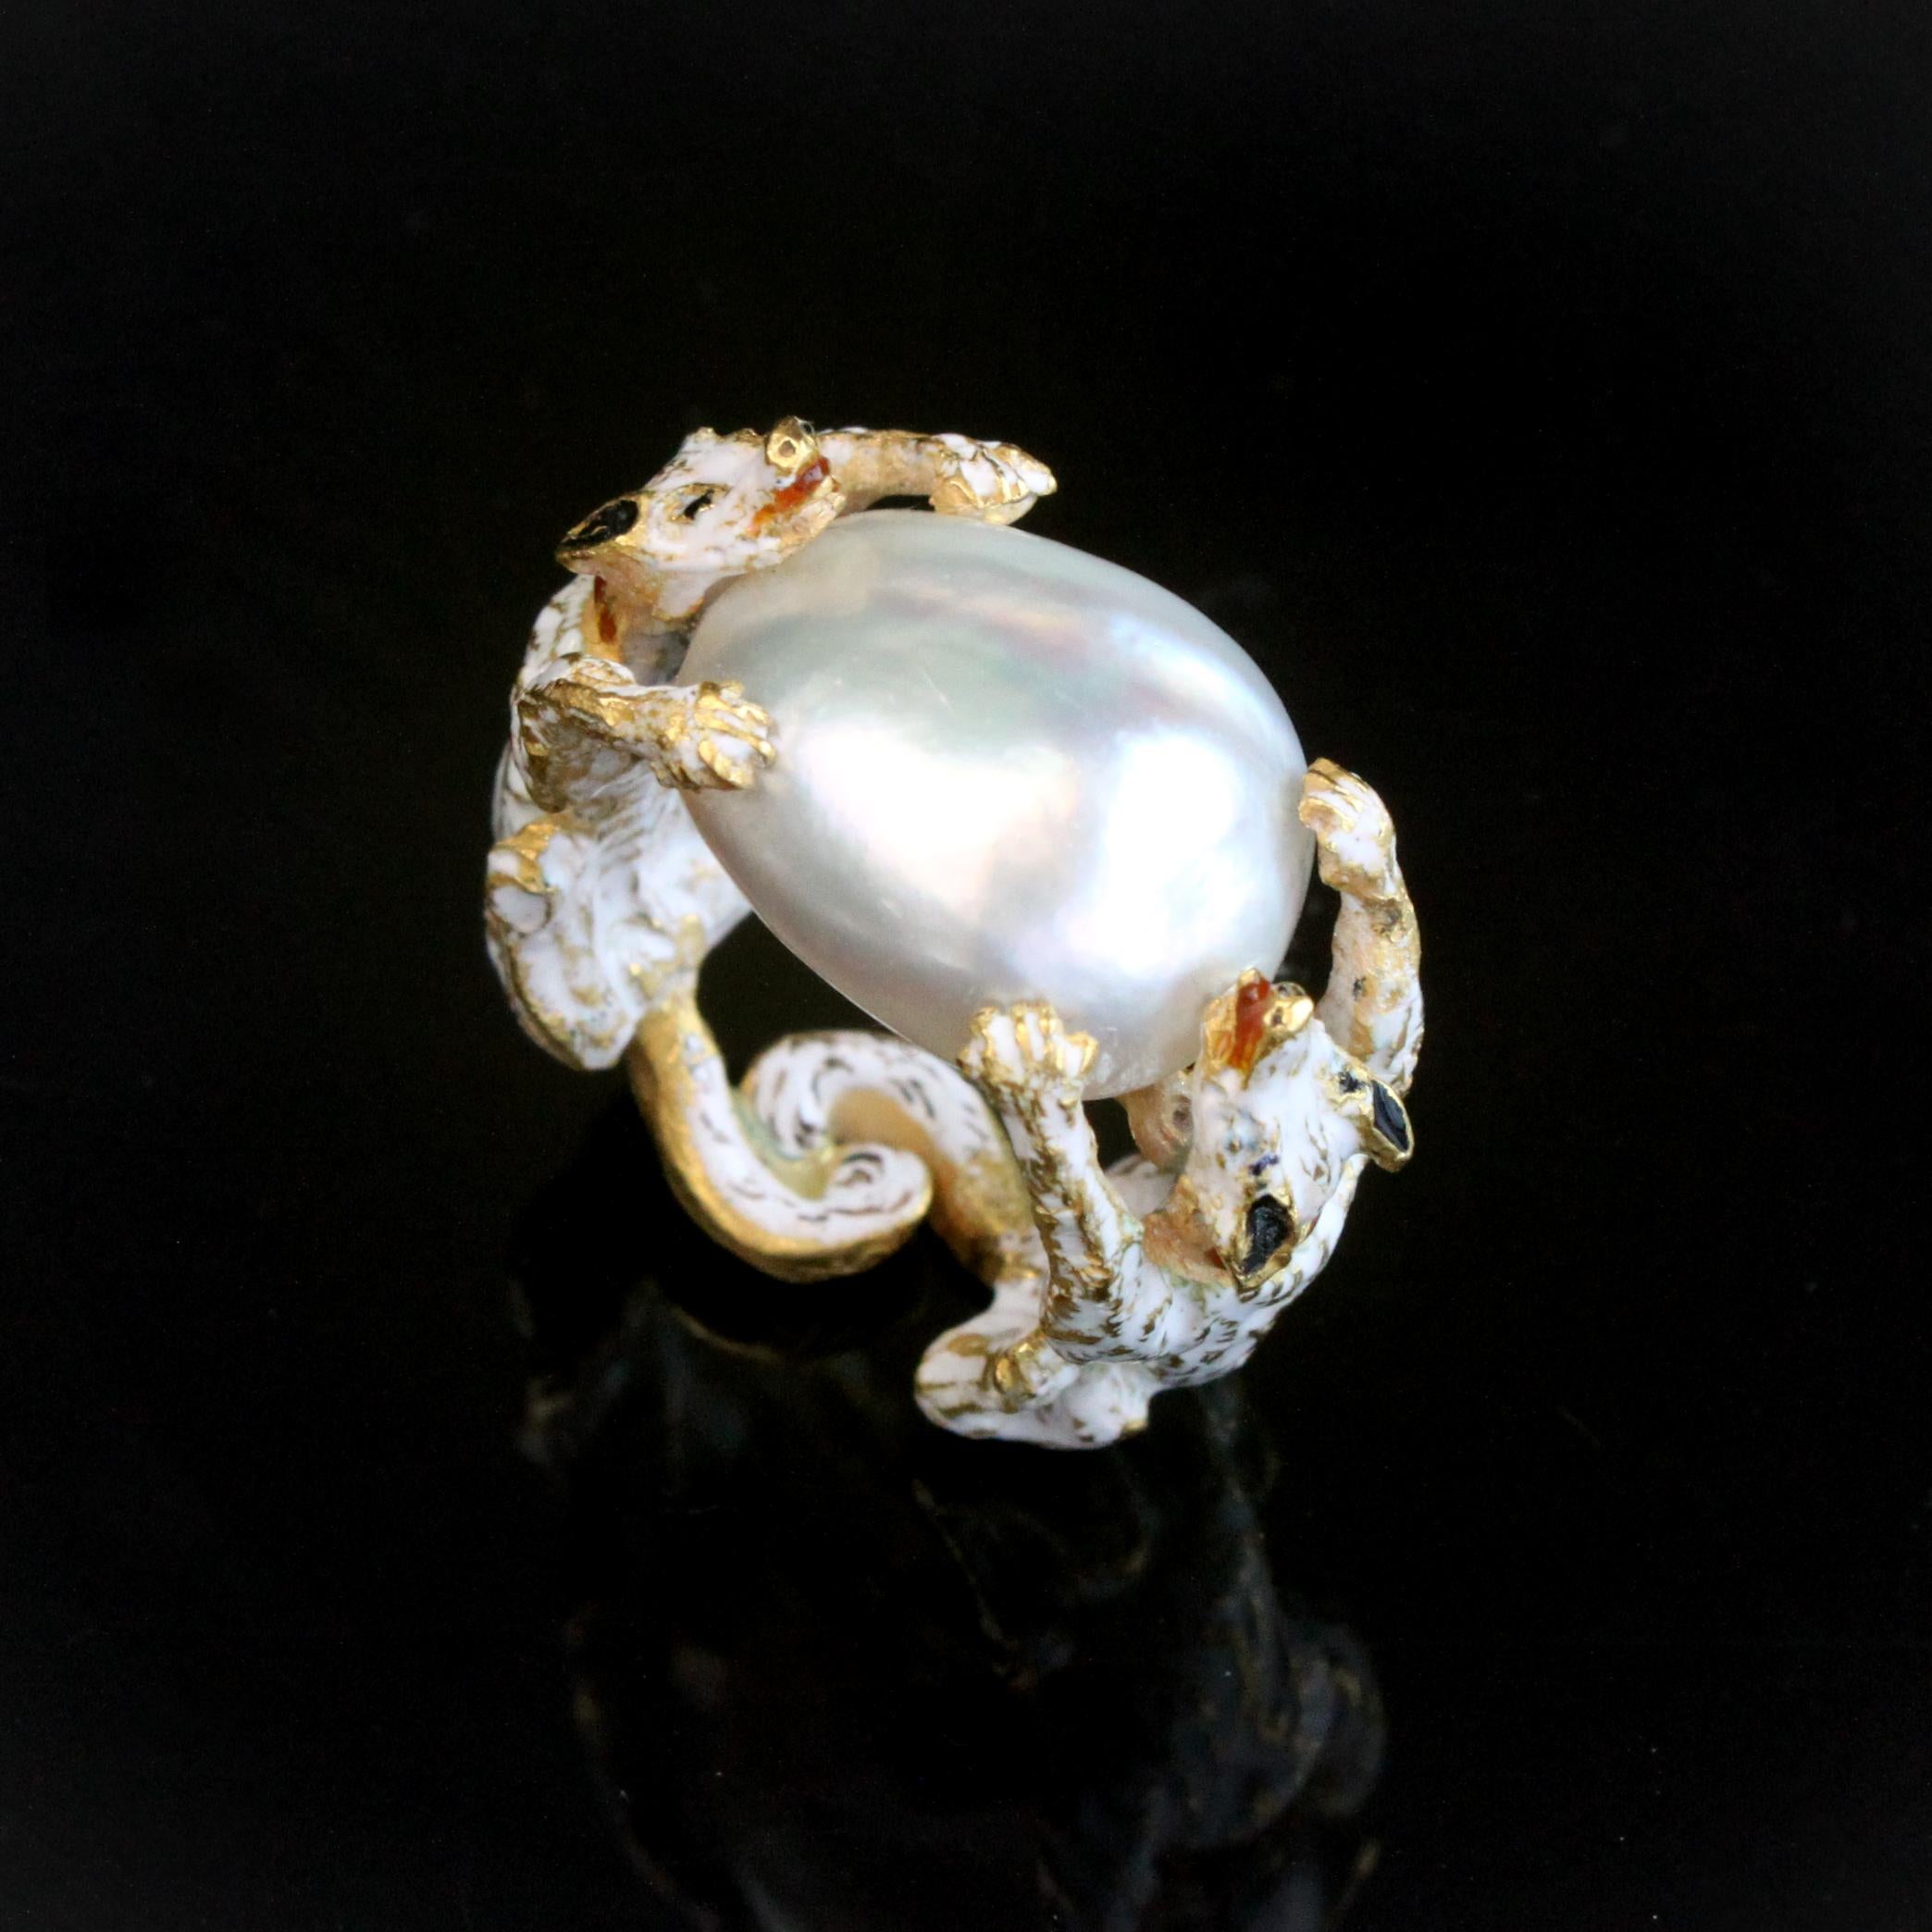 (Neo) Renaissance Natural Saltwater Pearl and Enamel Dogs Ring, ca. 18th-19th Century

A very rare Renaissance (possibly revival) enamel and natural pearl ring with a large natural saltwater pearl of ca. 15 carats (certified) symbolising possibly a